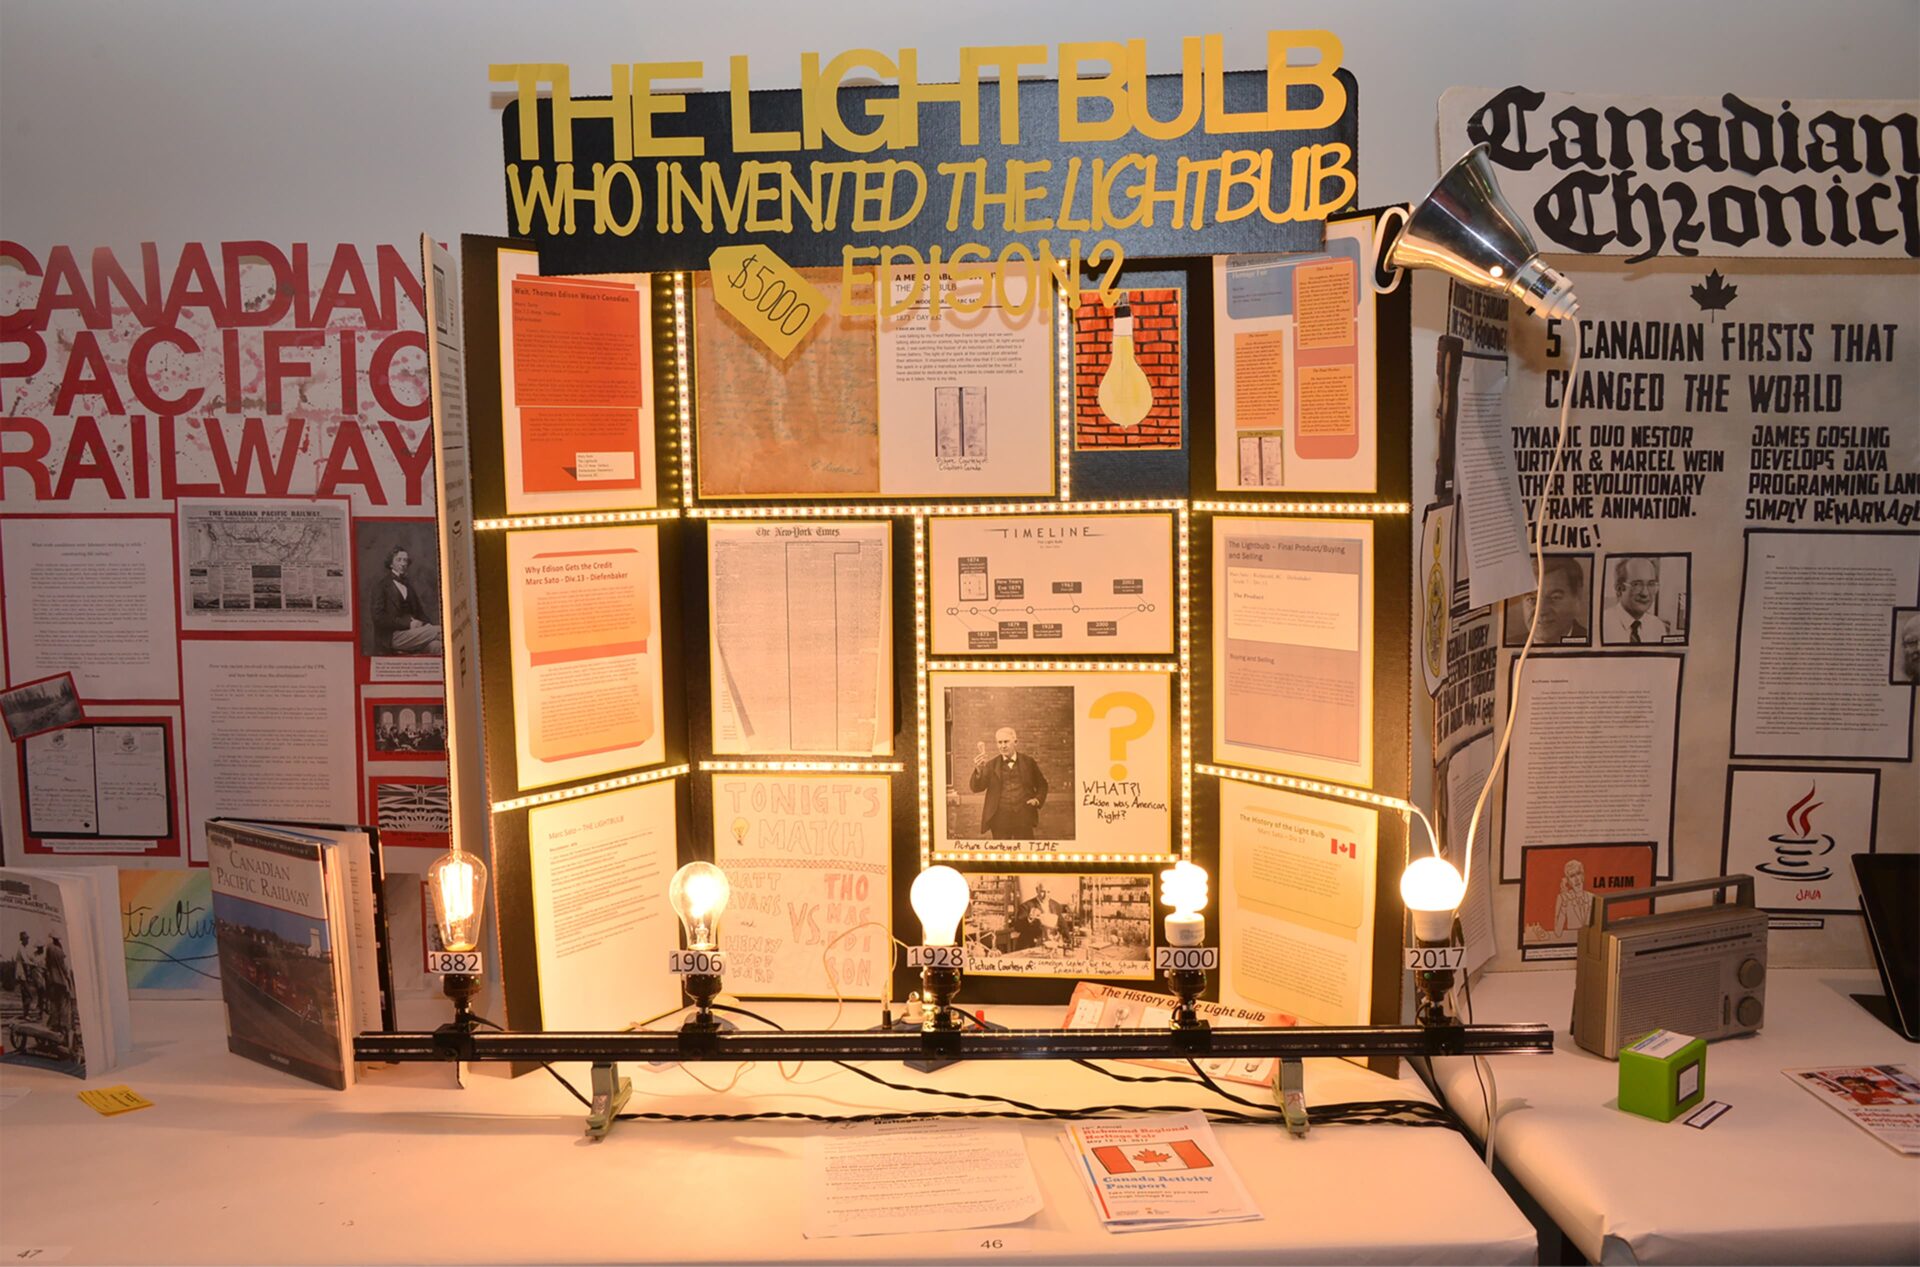 Photo showing light bulbs from various years and an exhibition board